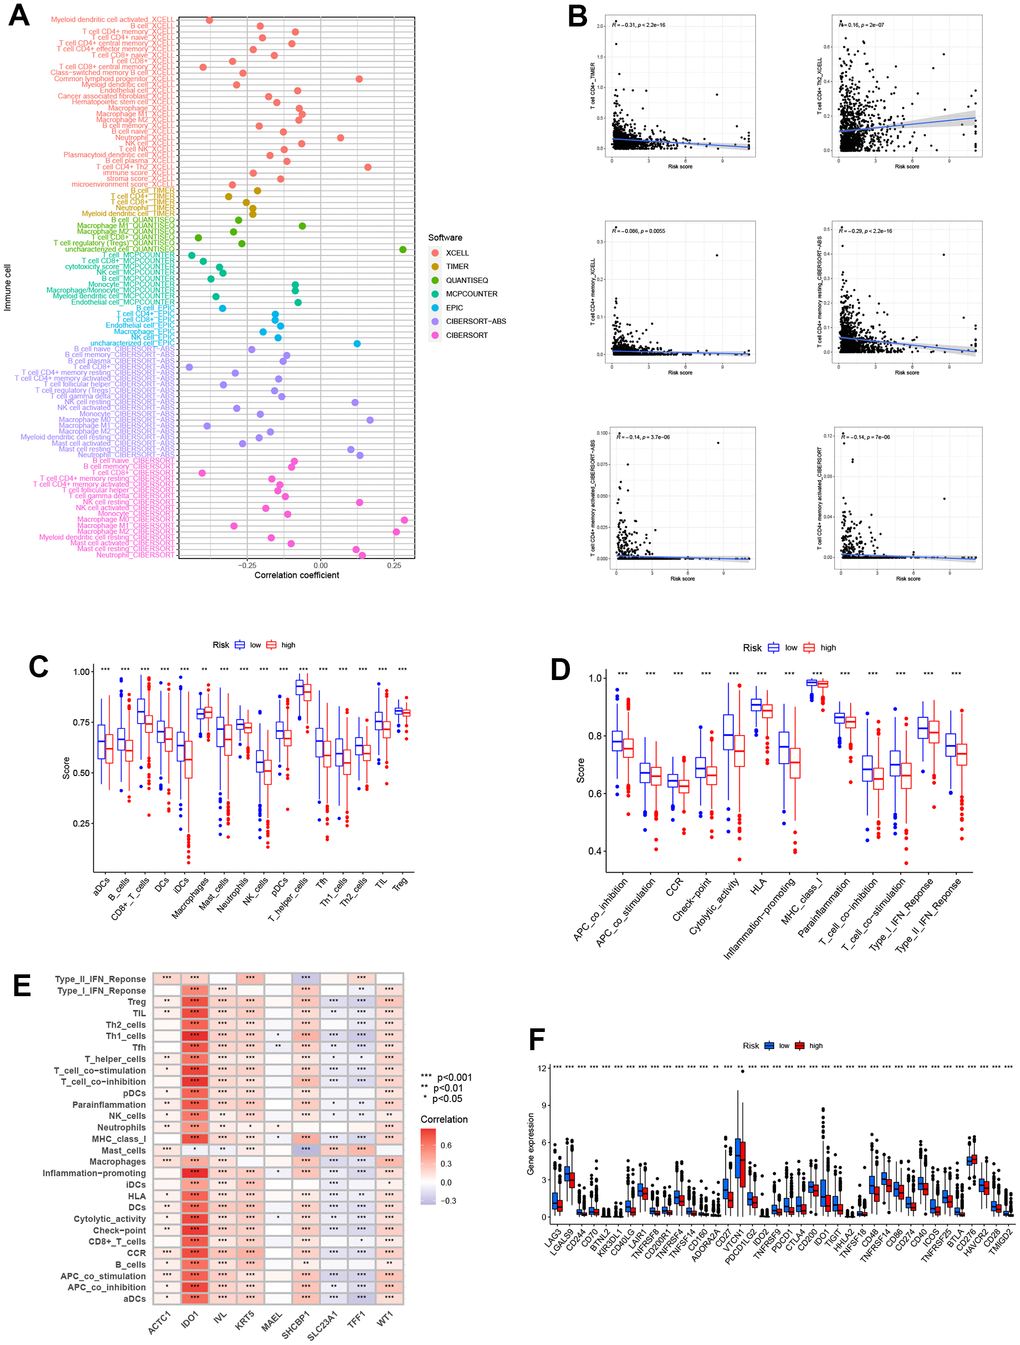 Analysis related to immune between two groups. (A) Immune cell bubble plot of risk groups. More immune cells were associated with the high-risk group. (B) Correlations between risk score and immune cell types. (C, D) ssGSEA scores of immune cells and immune functions between high and low-risk groups. ssGSEA scores were lower in the high-risk group. (E) Correlations between immune cells/functions and risk signature genes. (F) The immune checkpoint genes were expressed differently in the two groups, and the gene tended to be lower in the high-risk group (***P